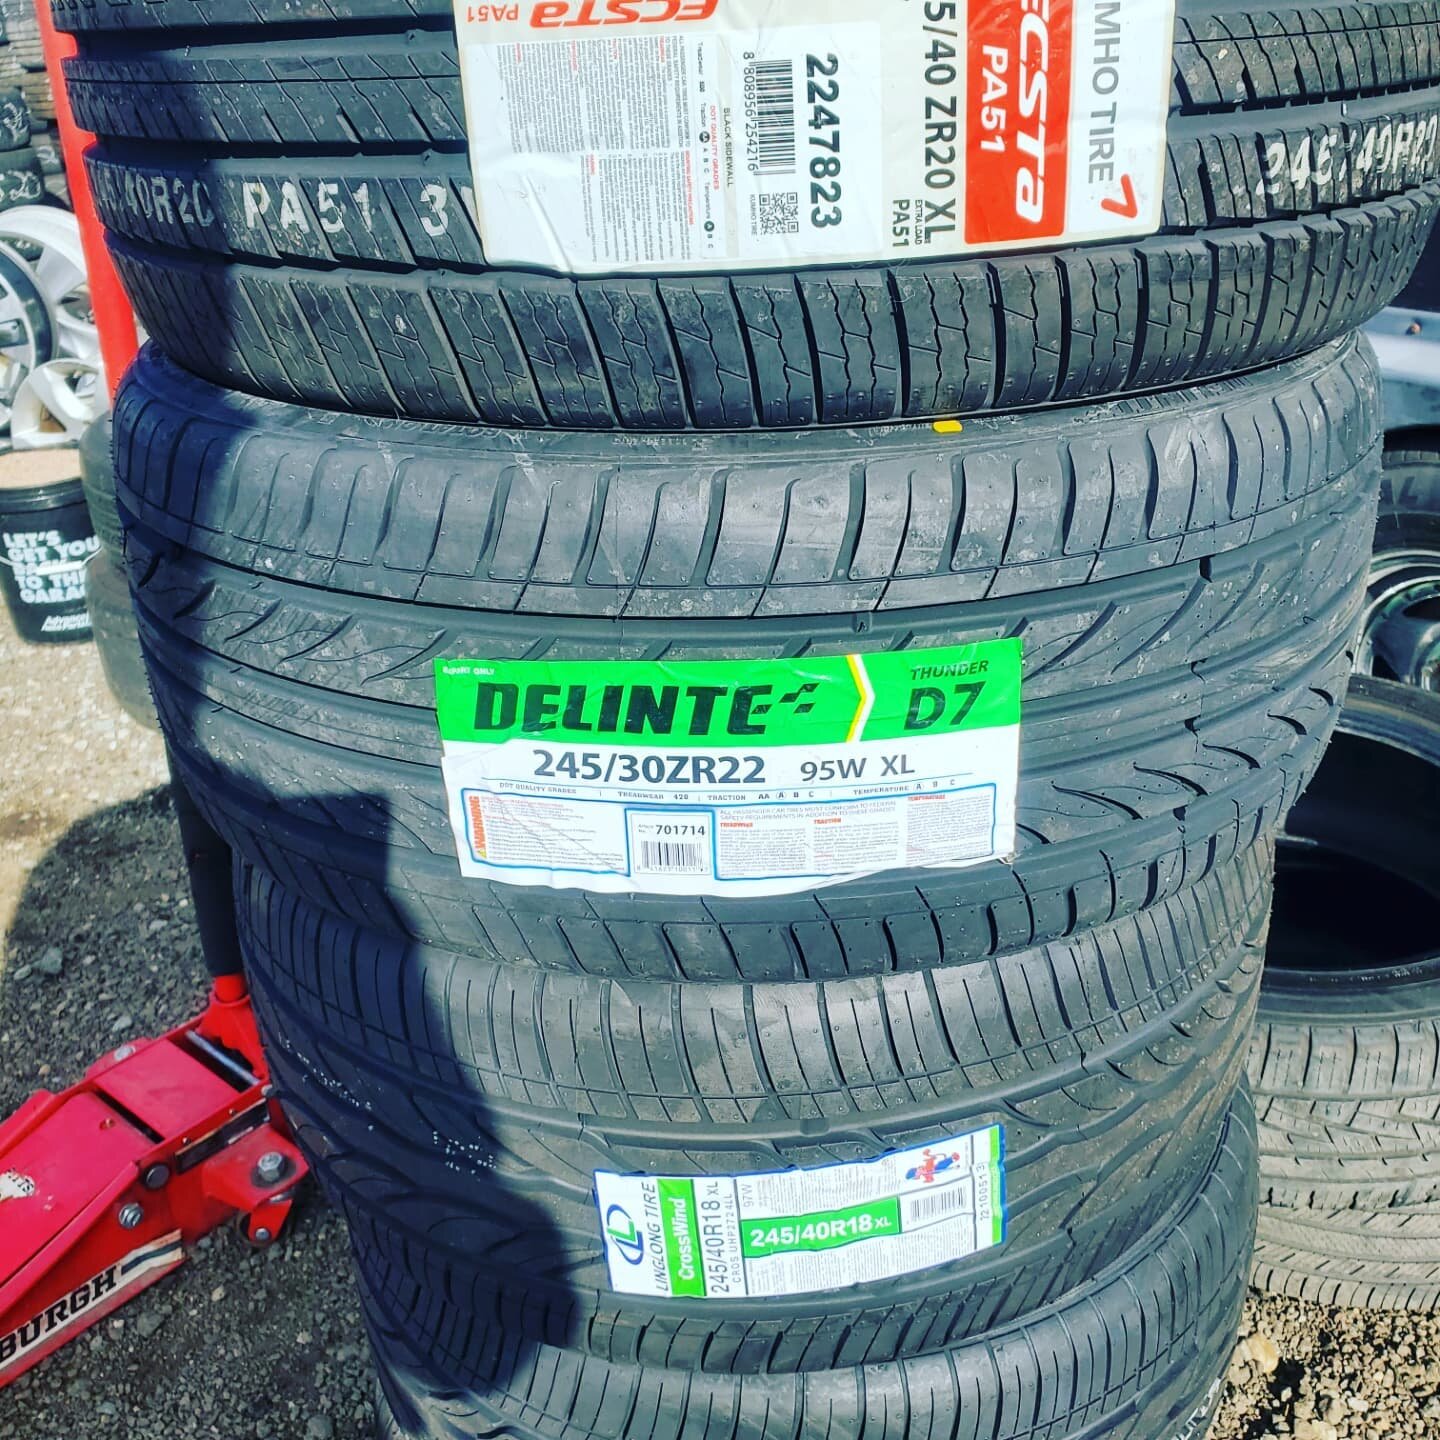 New tires wholesale to the public! 
Looking for new tires under a budget let us know and we'll see what we can do. Call us at 240.825.6153#pgcounty #washingtondc #DMV #dcmetro #dc #virginia #nova #flattires #tires #spare #tirechange #battery #battery